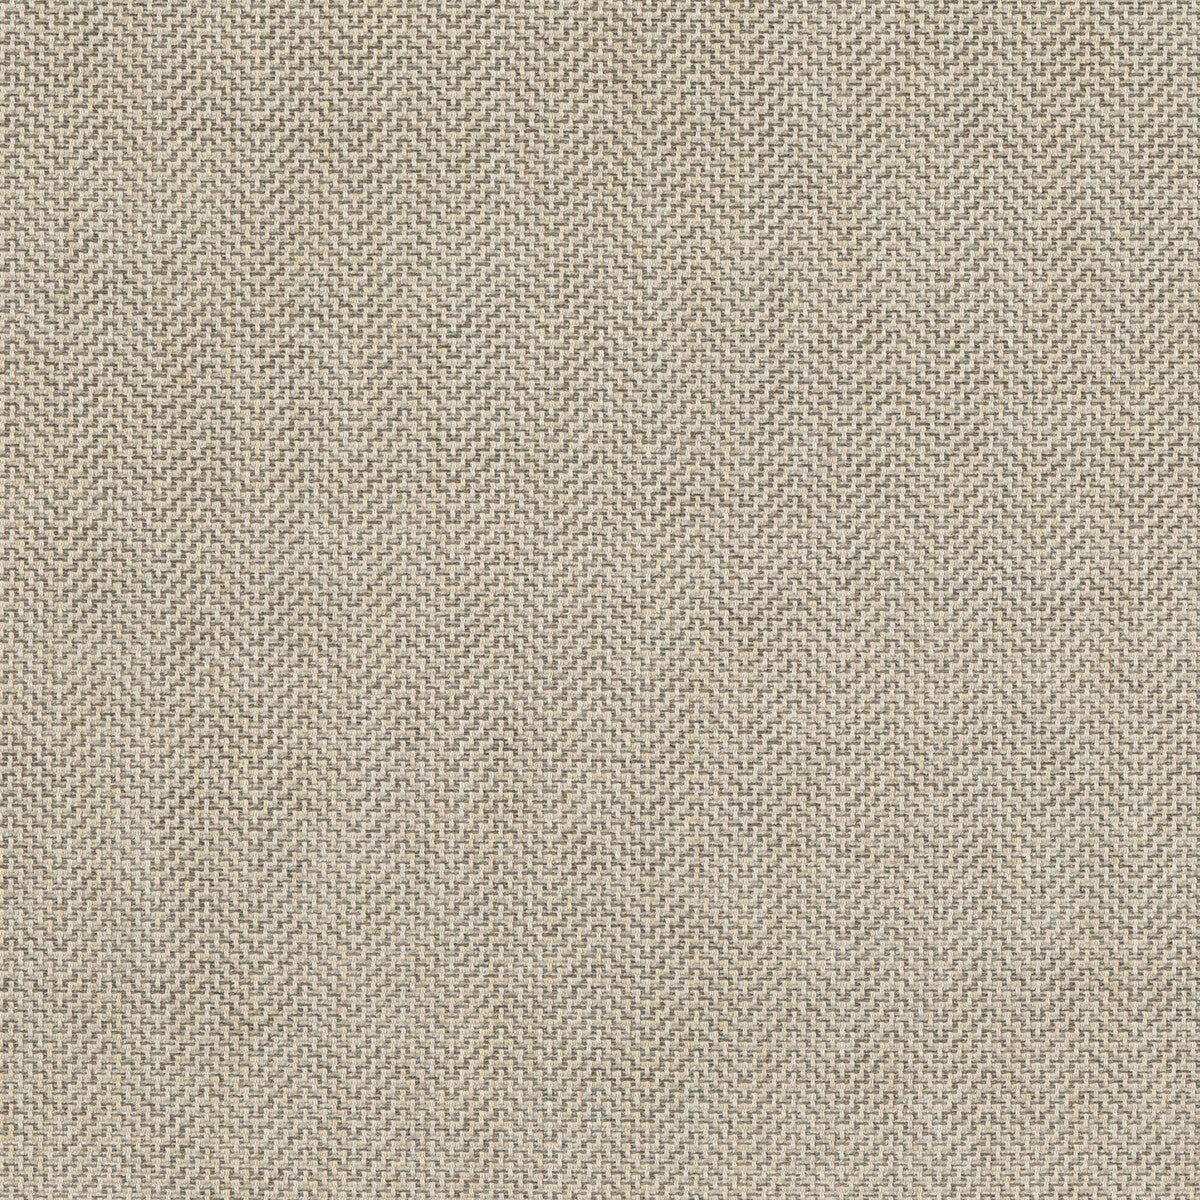 Glanville fabric in dove color - pattern BF10873.910.0 - by G P &amp; J Baker in the Essential Colours II collection